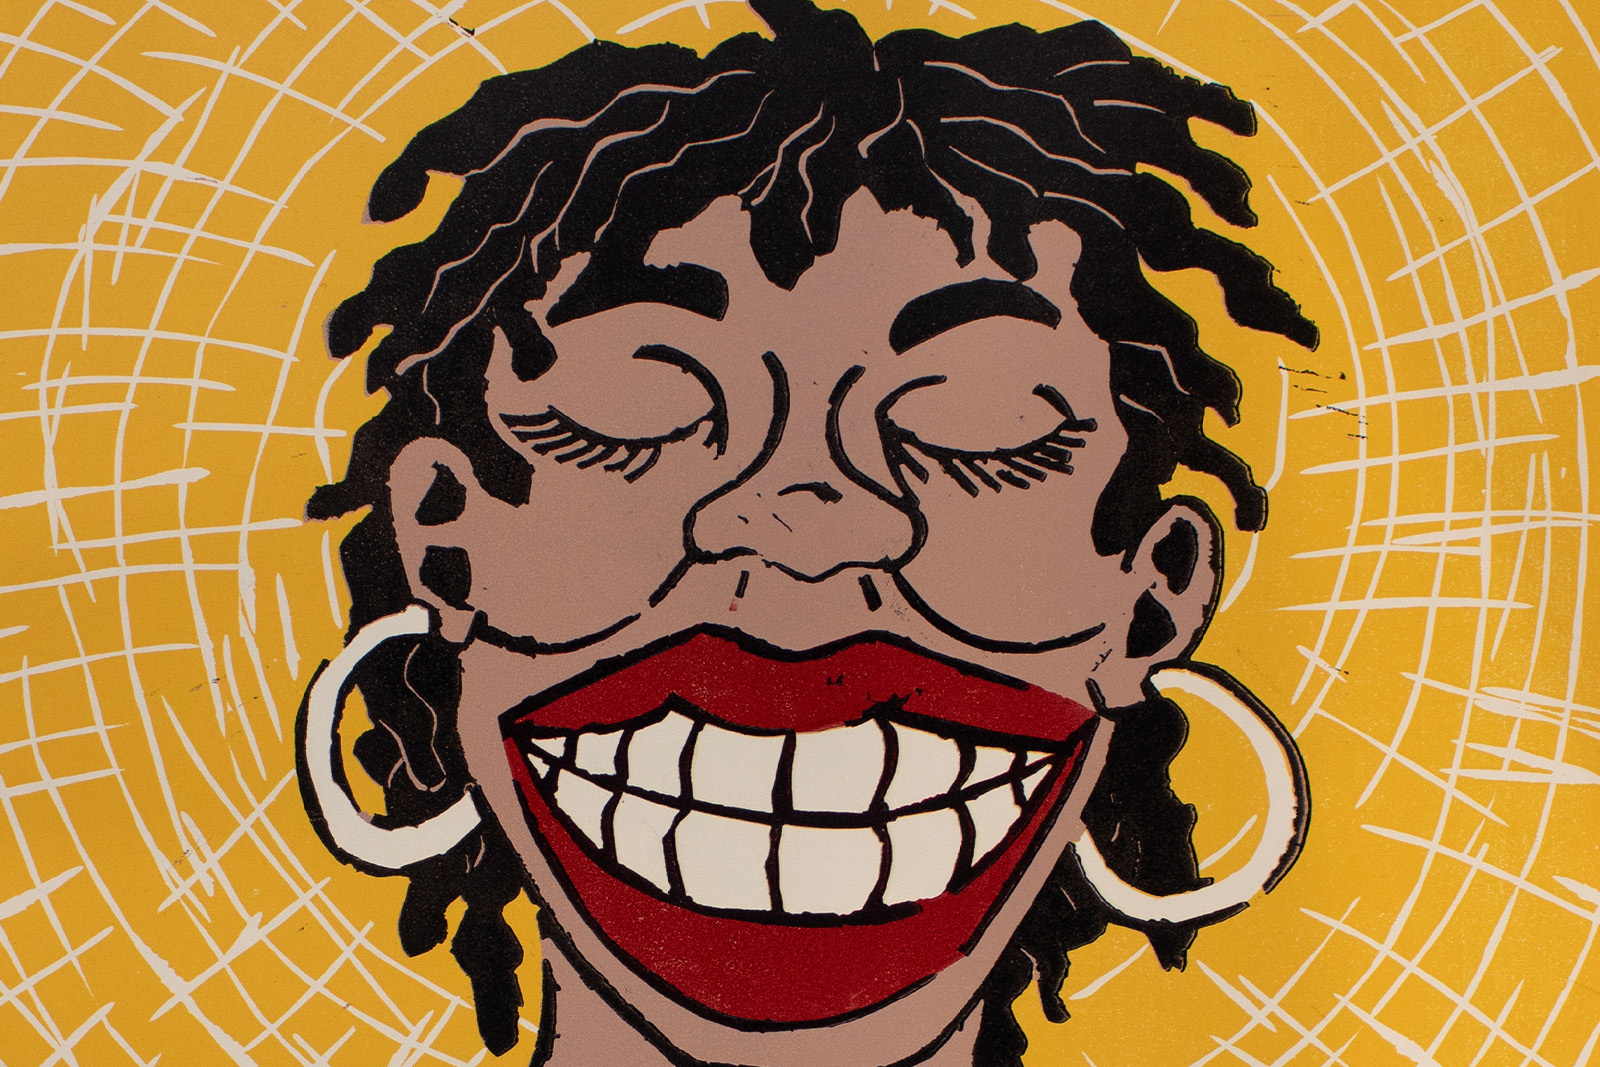 Wanda Ewing print Big Lips a self portriat with a borad smile against a yellow background